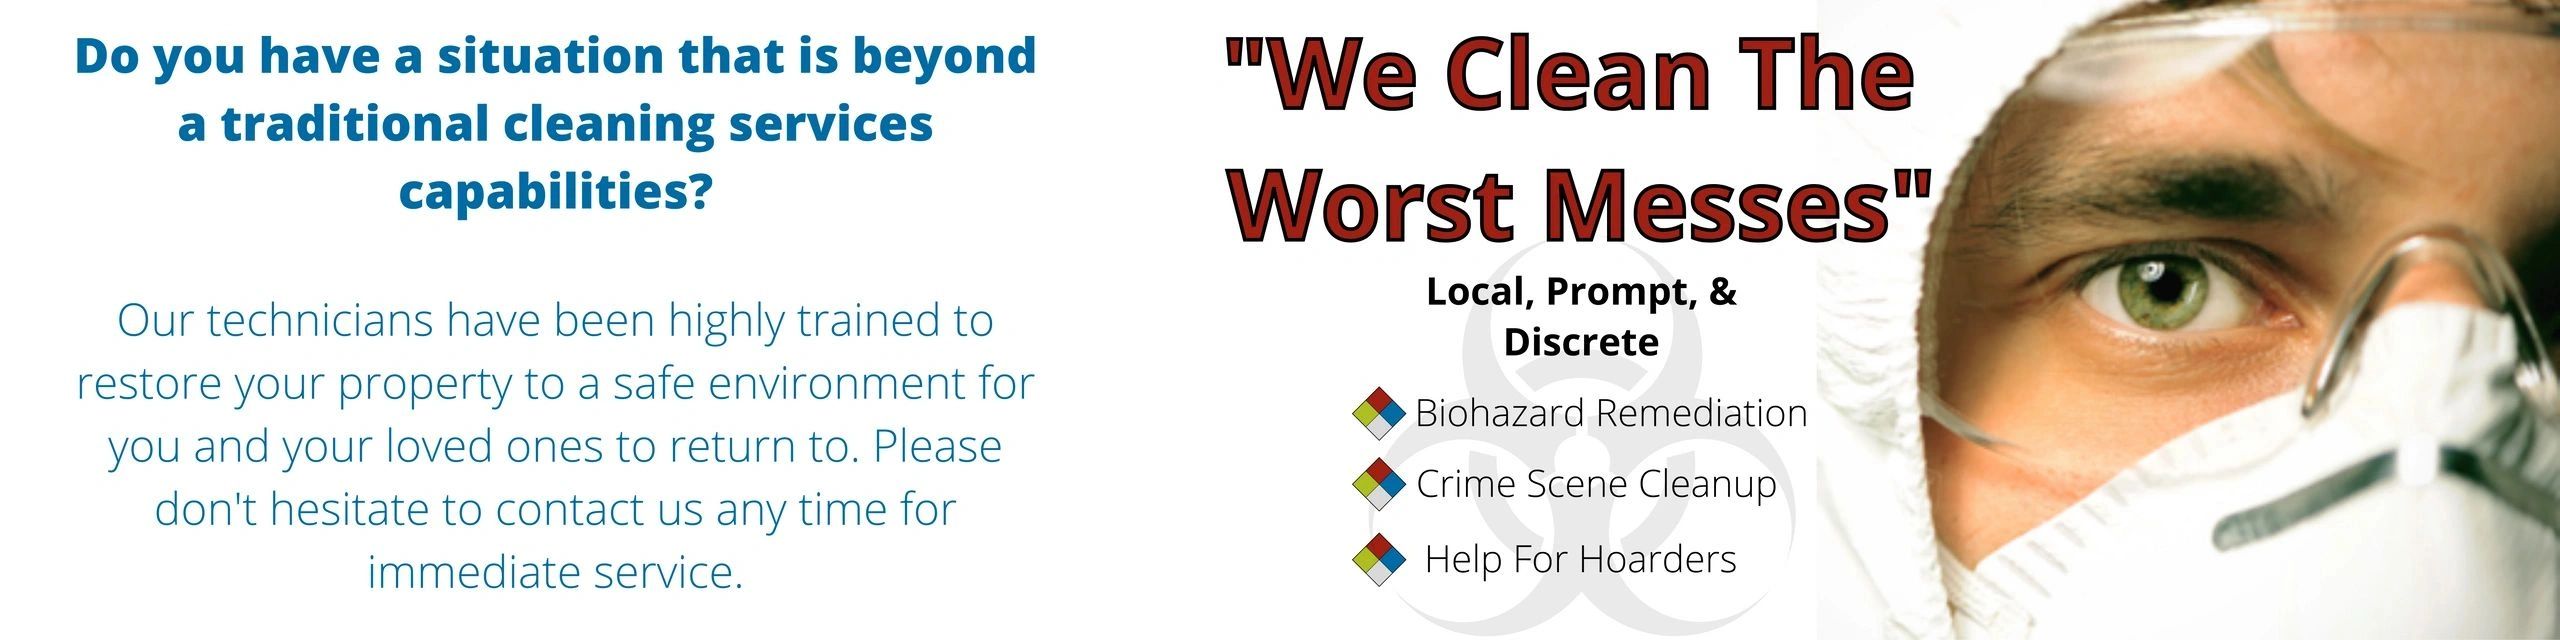 Home page banner explaining our hazmat cleaning services.